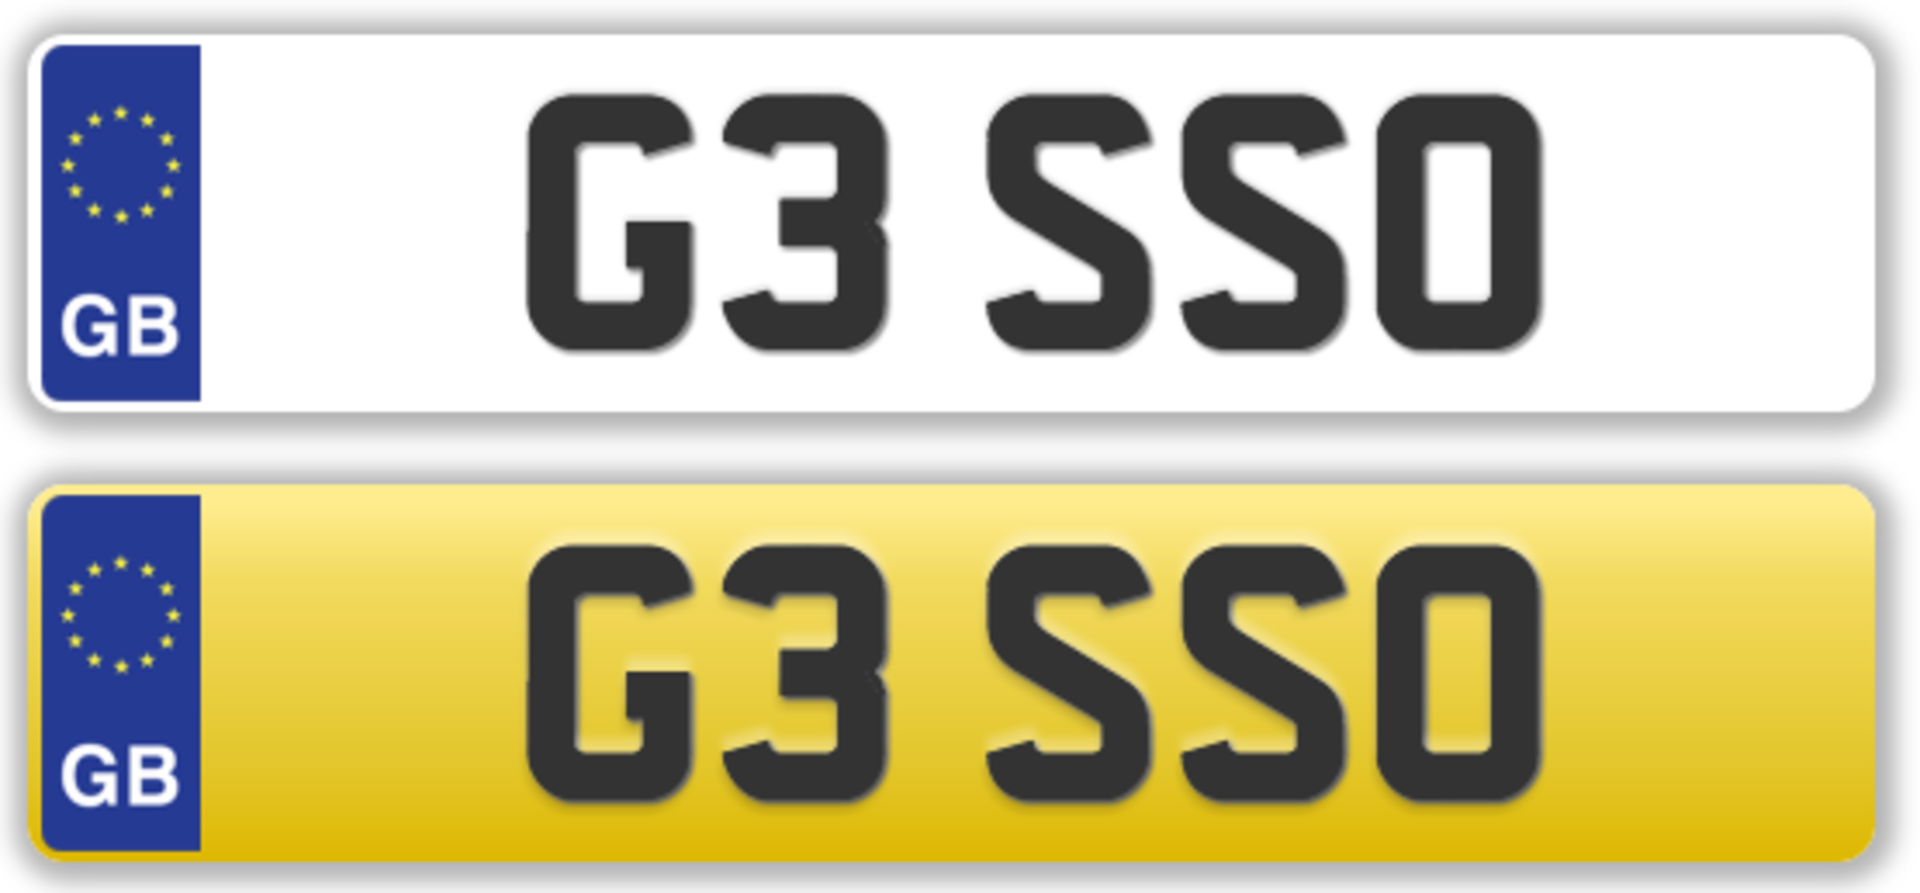 Cherished Plate - G3 SSO - No transfer fees. All registrations on retention and ready to transfer.